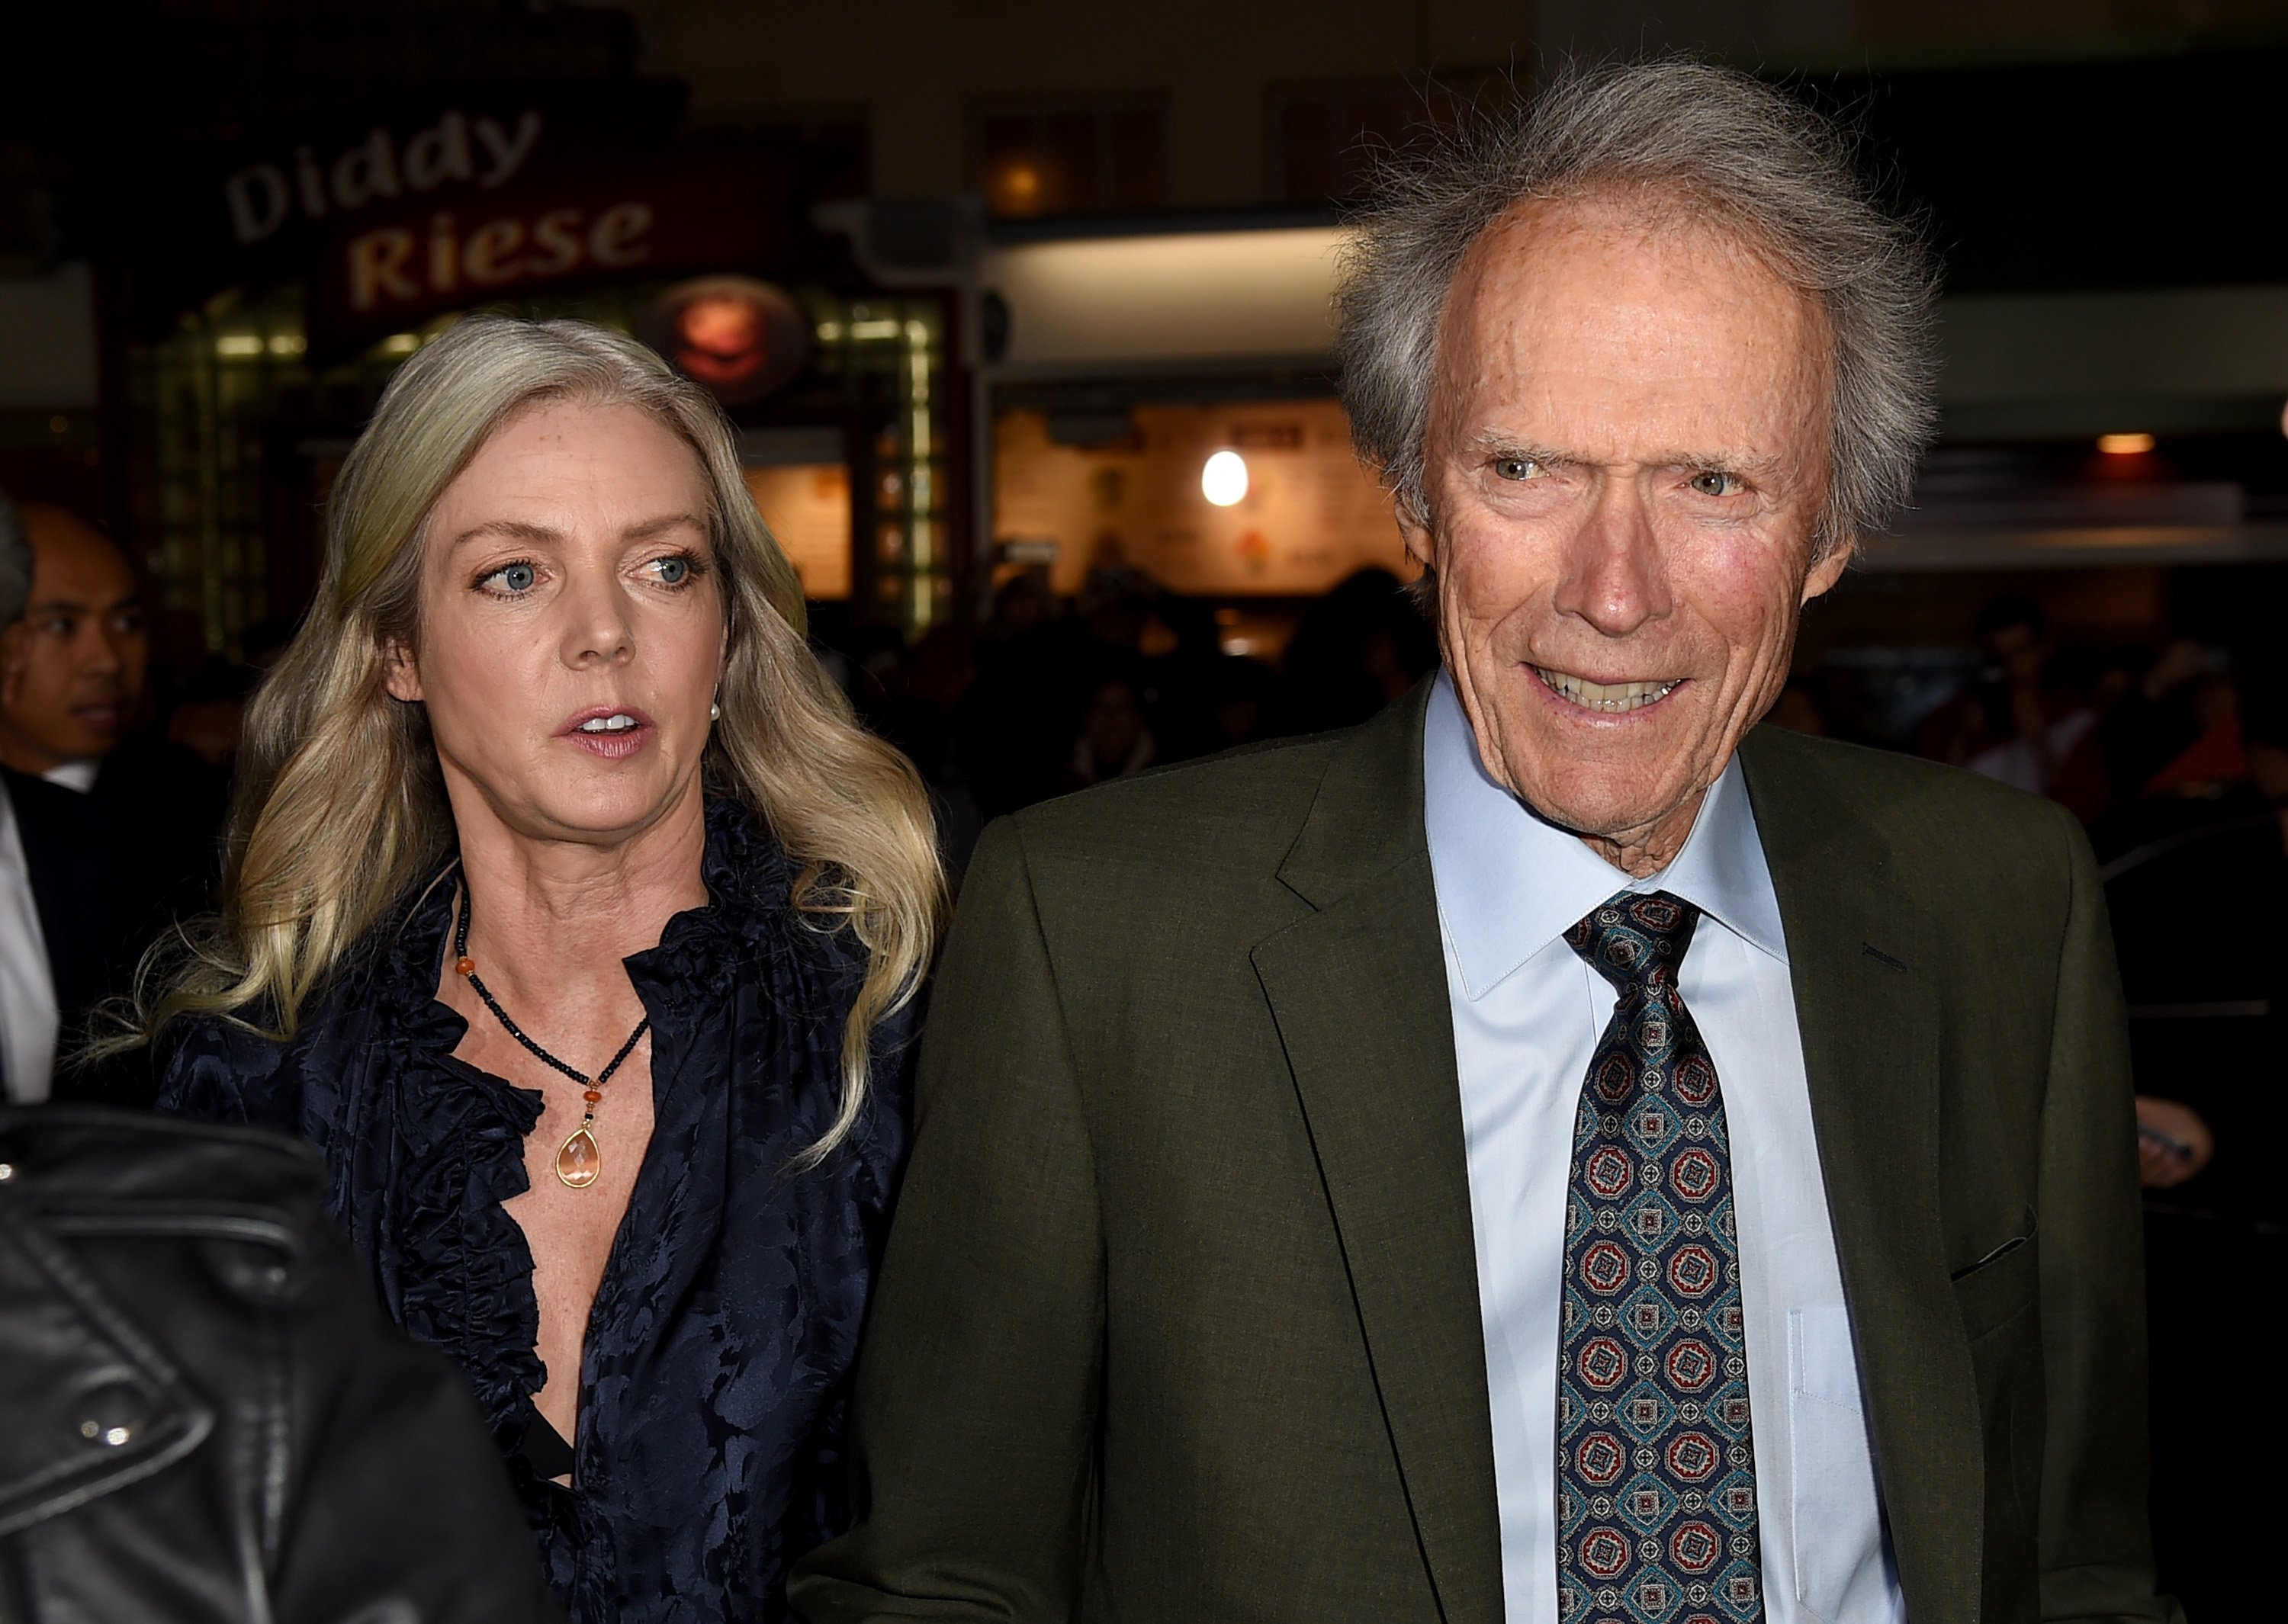 Clint Eastwood with girlfriend Christina Sandera at the Village Theatre on December 10 2018 in Los Angeles California  | Source: Getty Images